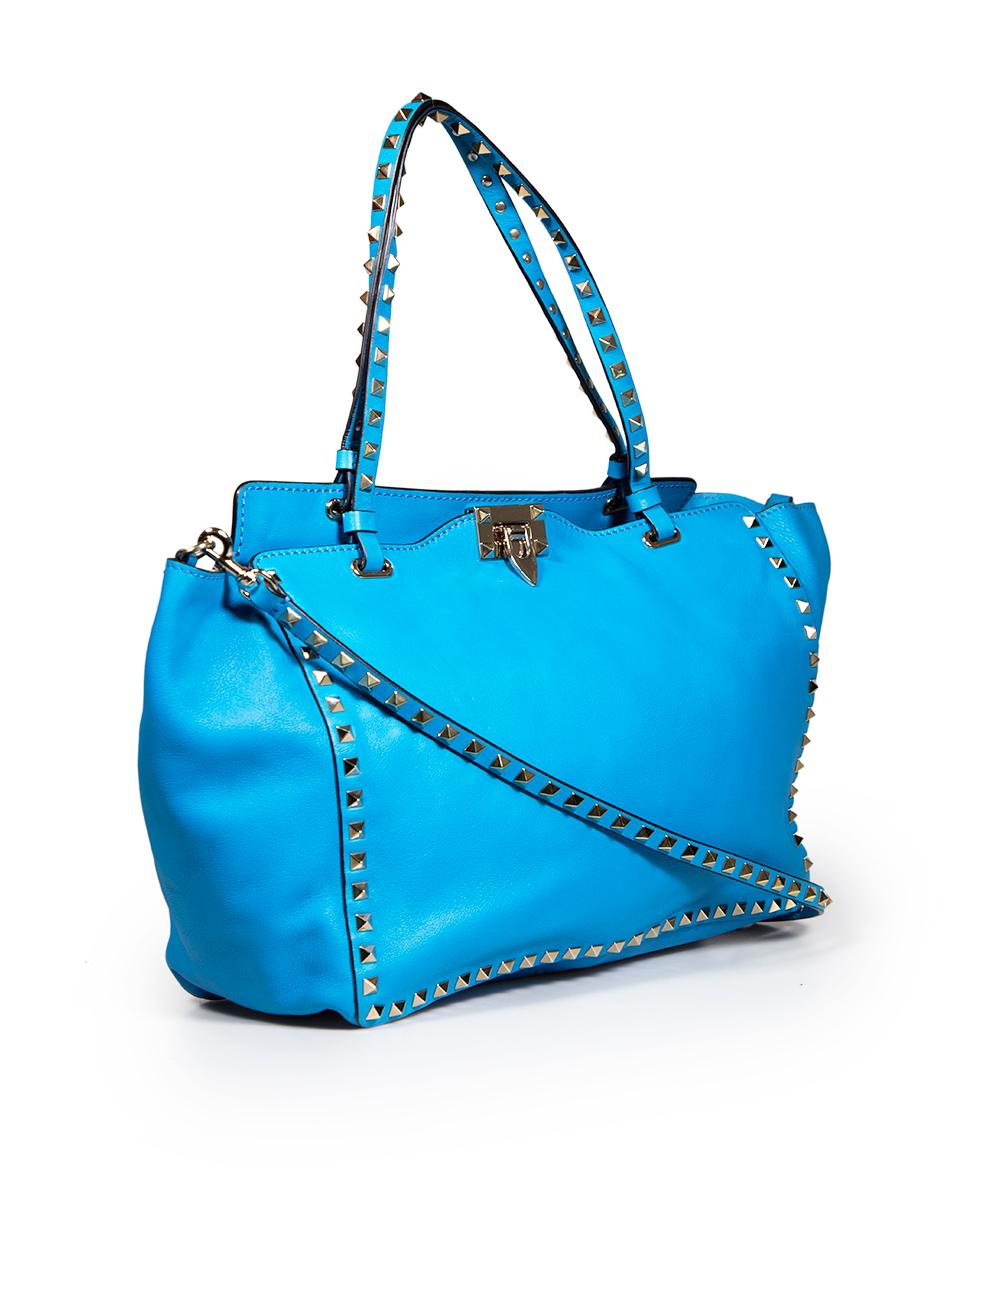 CONDITION is Very good. Minimal wear to Valentino is evident. Minimal wear to the front and back with very light scratches and indents to the leather on this used Valentino designer resale item.
 
 
 
 Details
 
 
 Blue
 
 Leather
 
 Medium tote